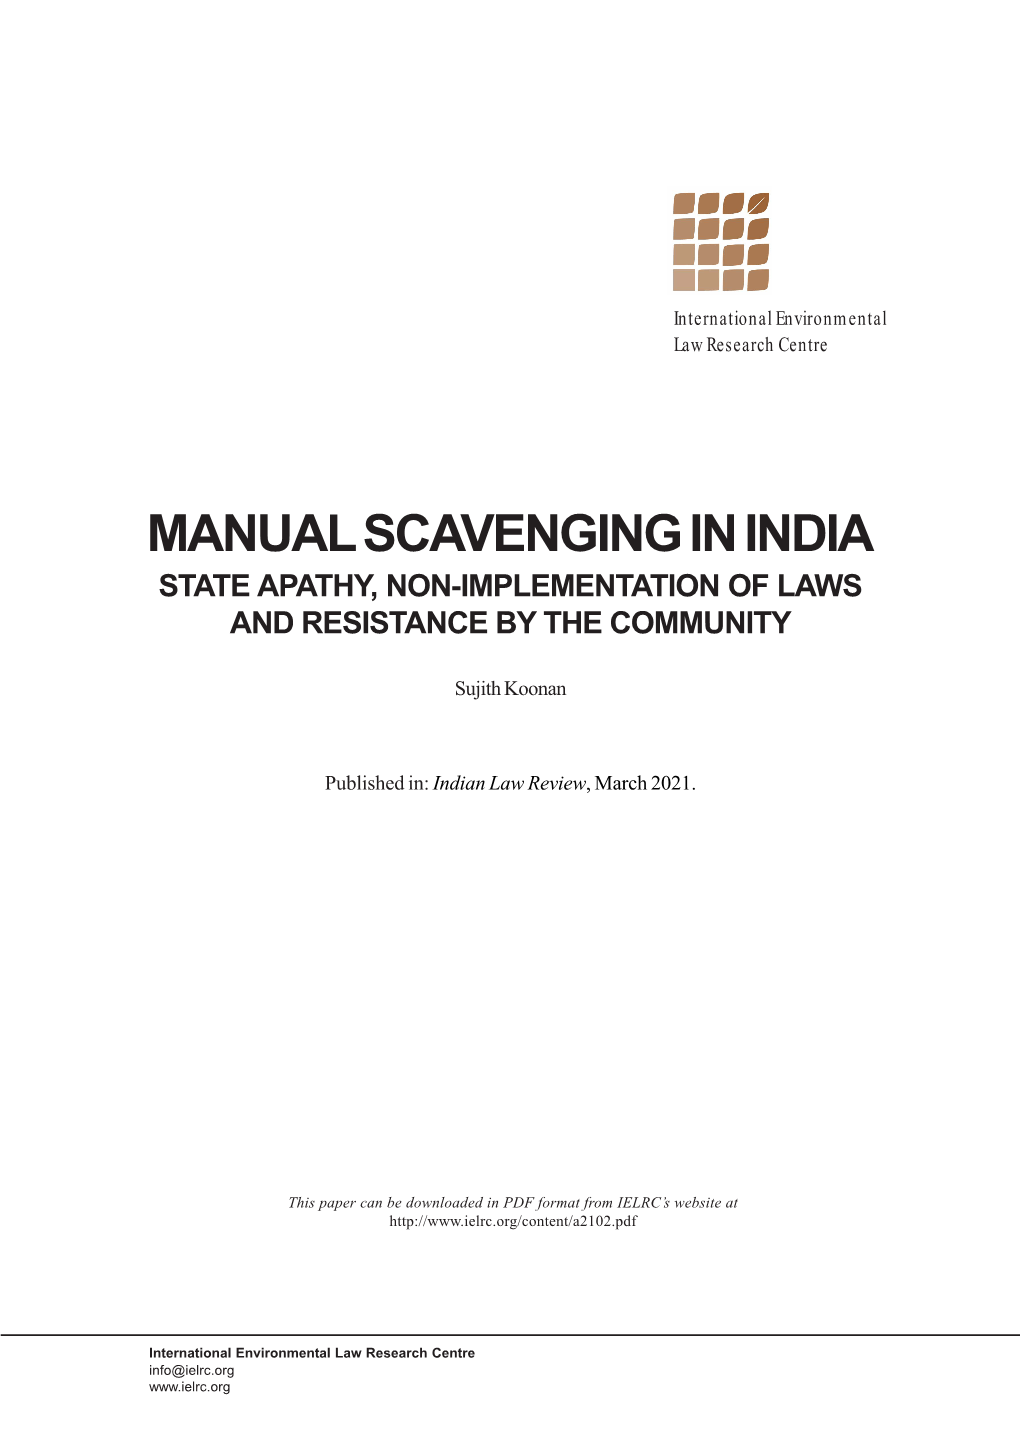 MANUAL SCAVENGING in INDIA: STATE APATHY, NON-IMPLEMENTATION of LAWS and RESISTANCE by the COMMUNITY Sujith Koonan